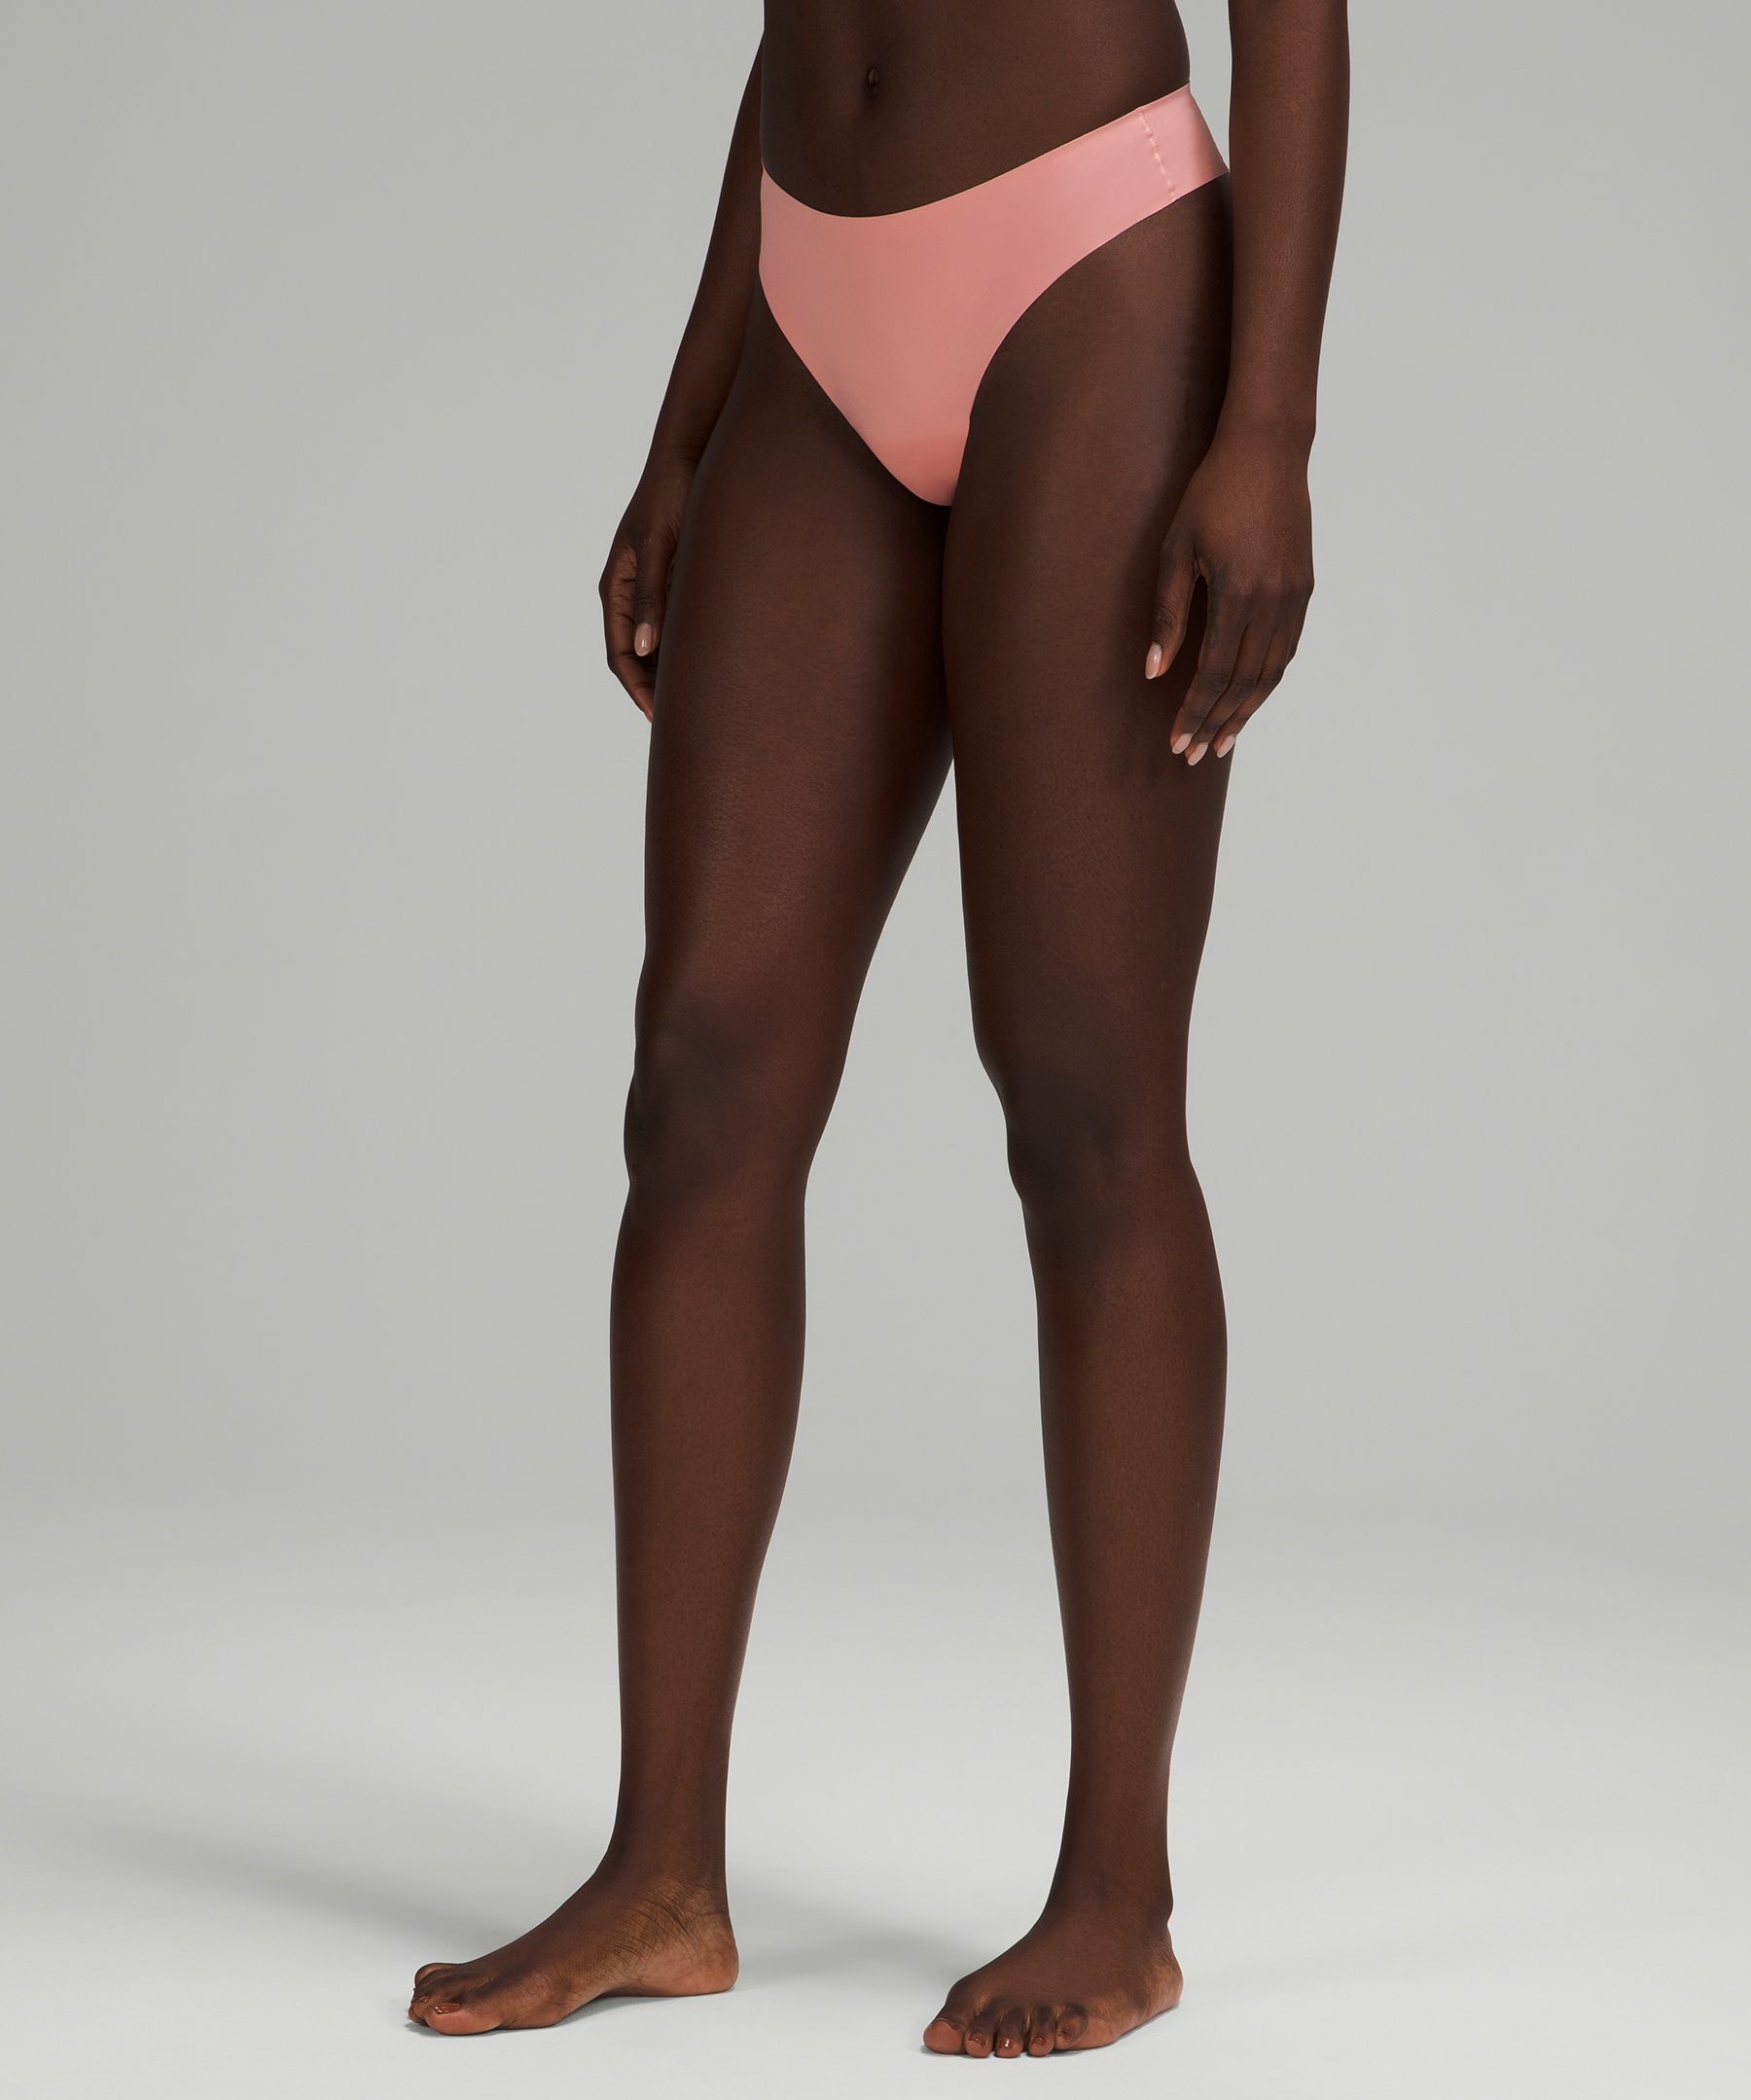 Lululemon Invisiwear Mid Rise Thong Underwear In Pink